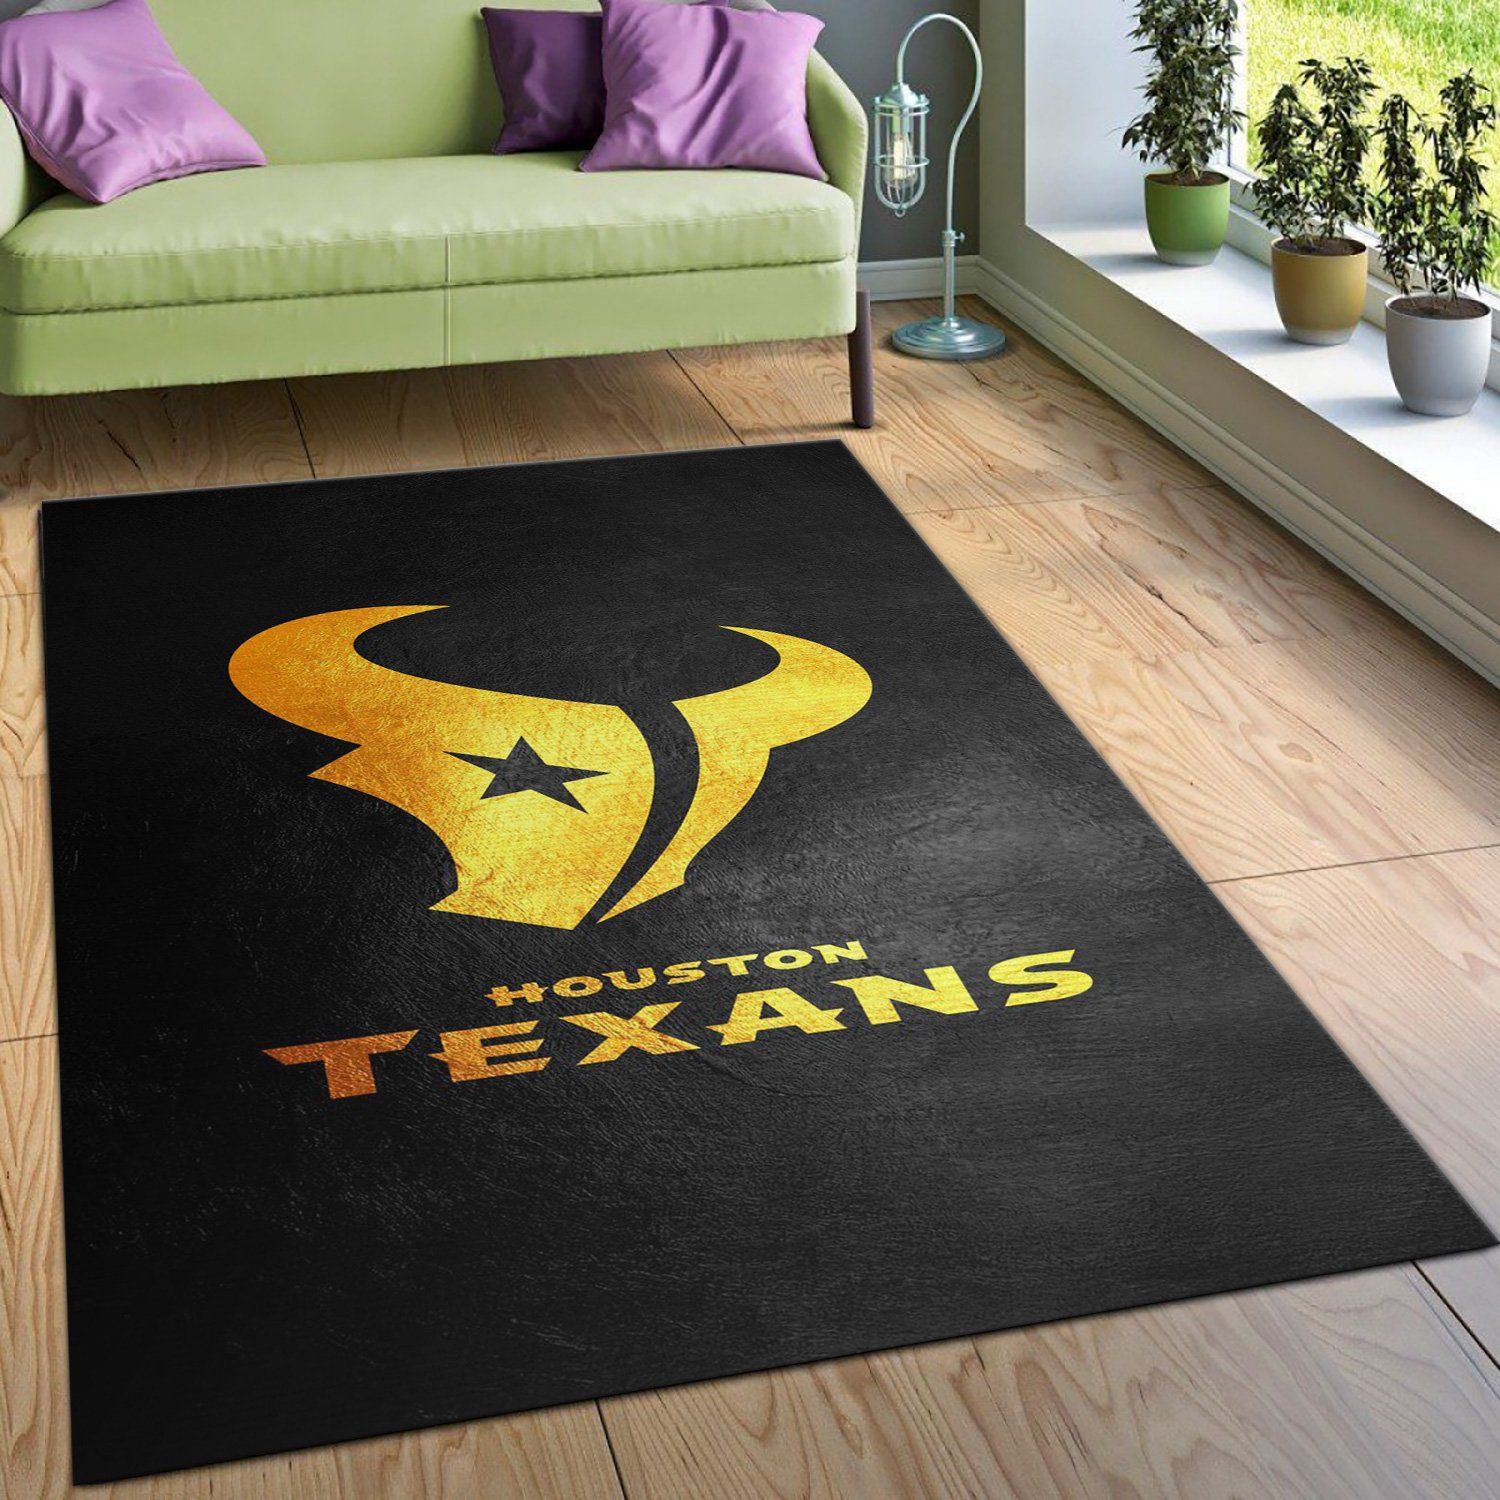 Houston Texans NFL Area Rug Carpet, Living room and bedroom Rug, Home ...